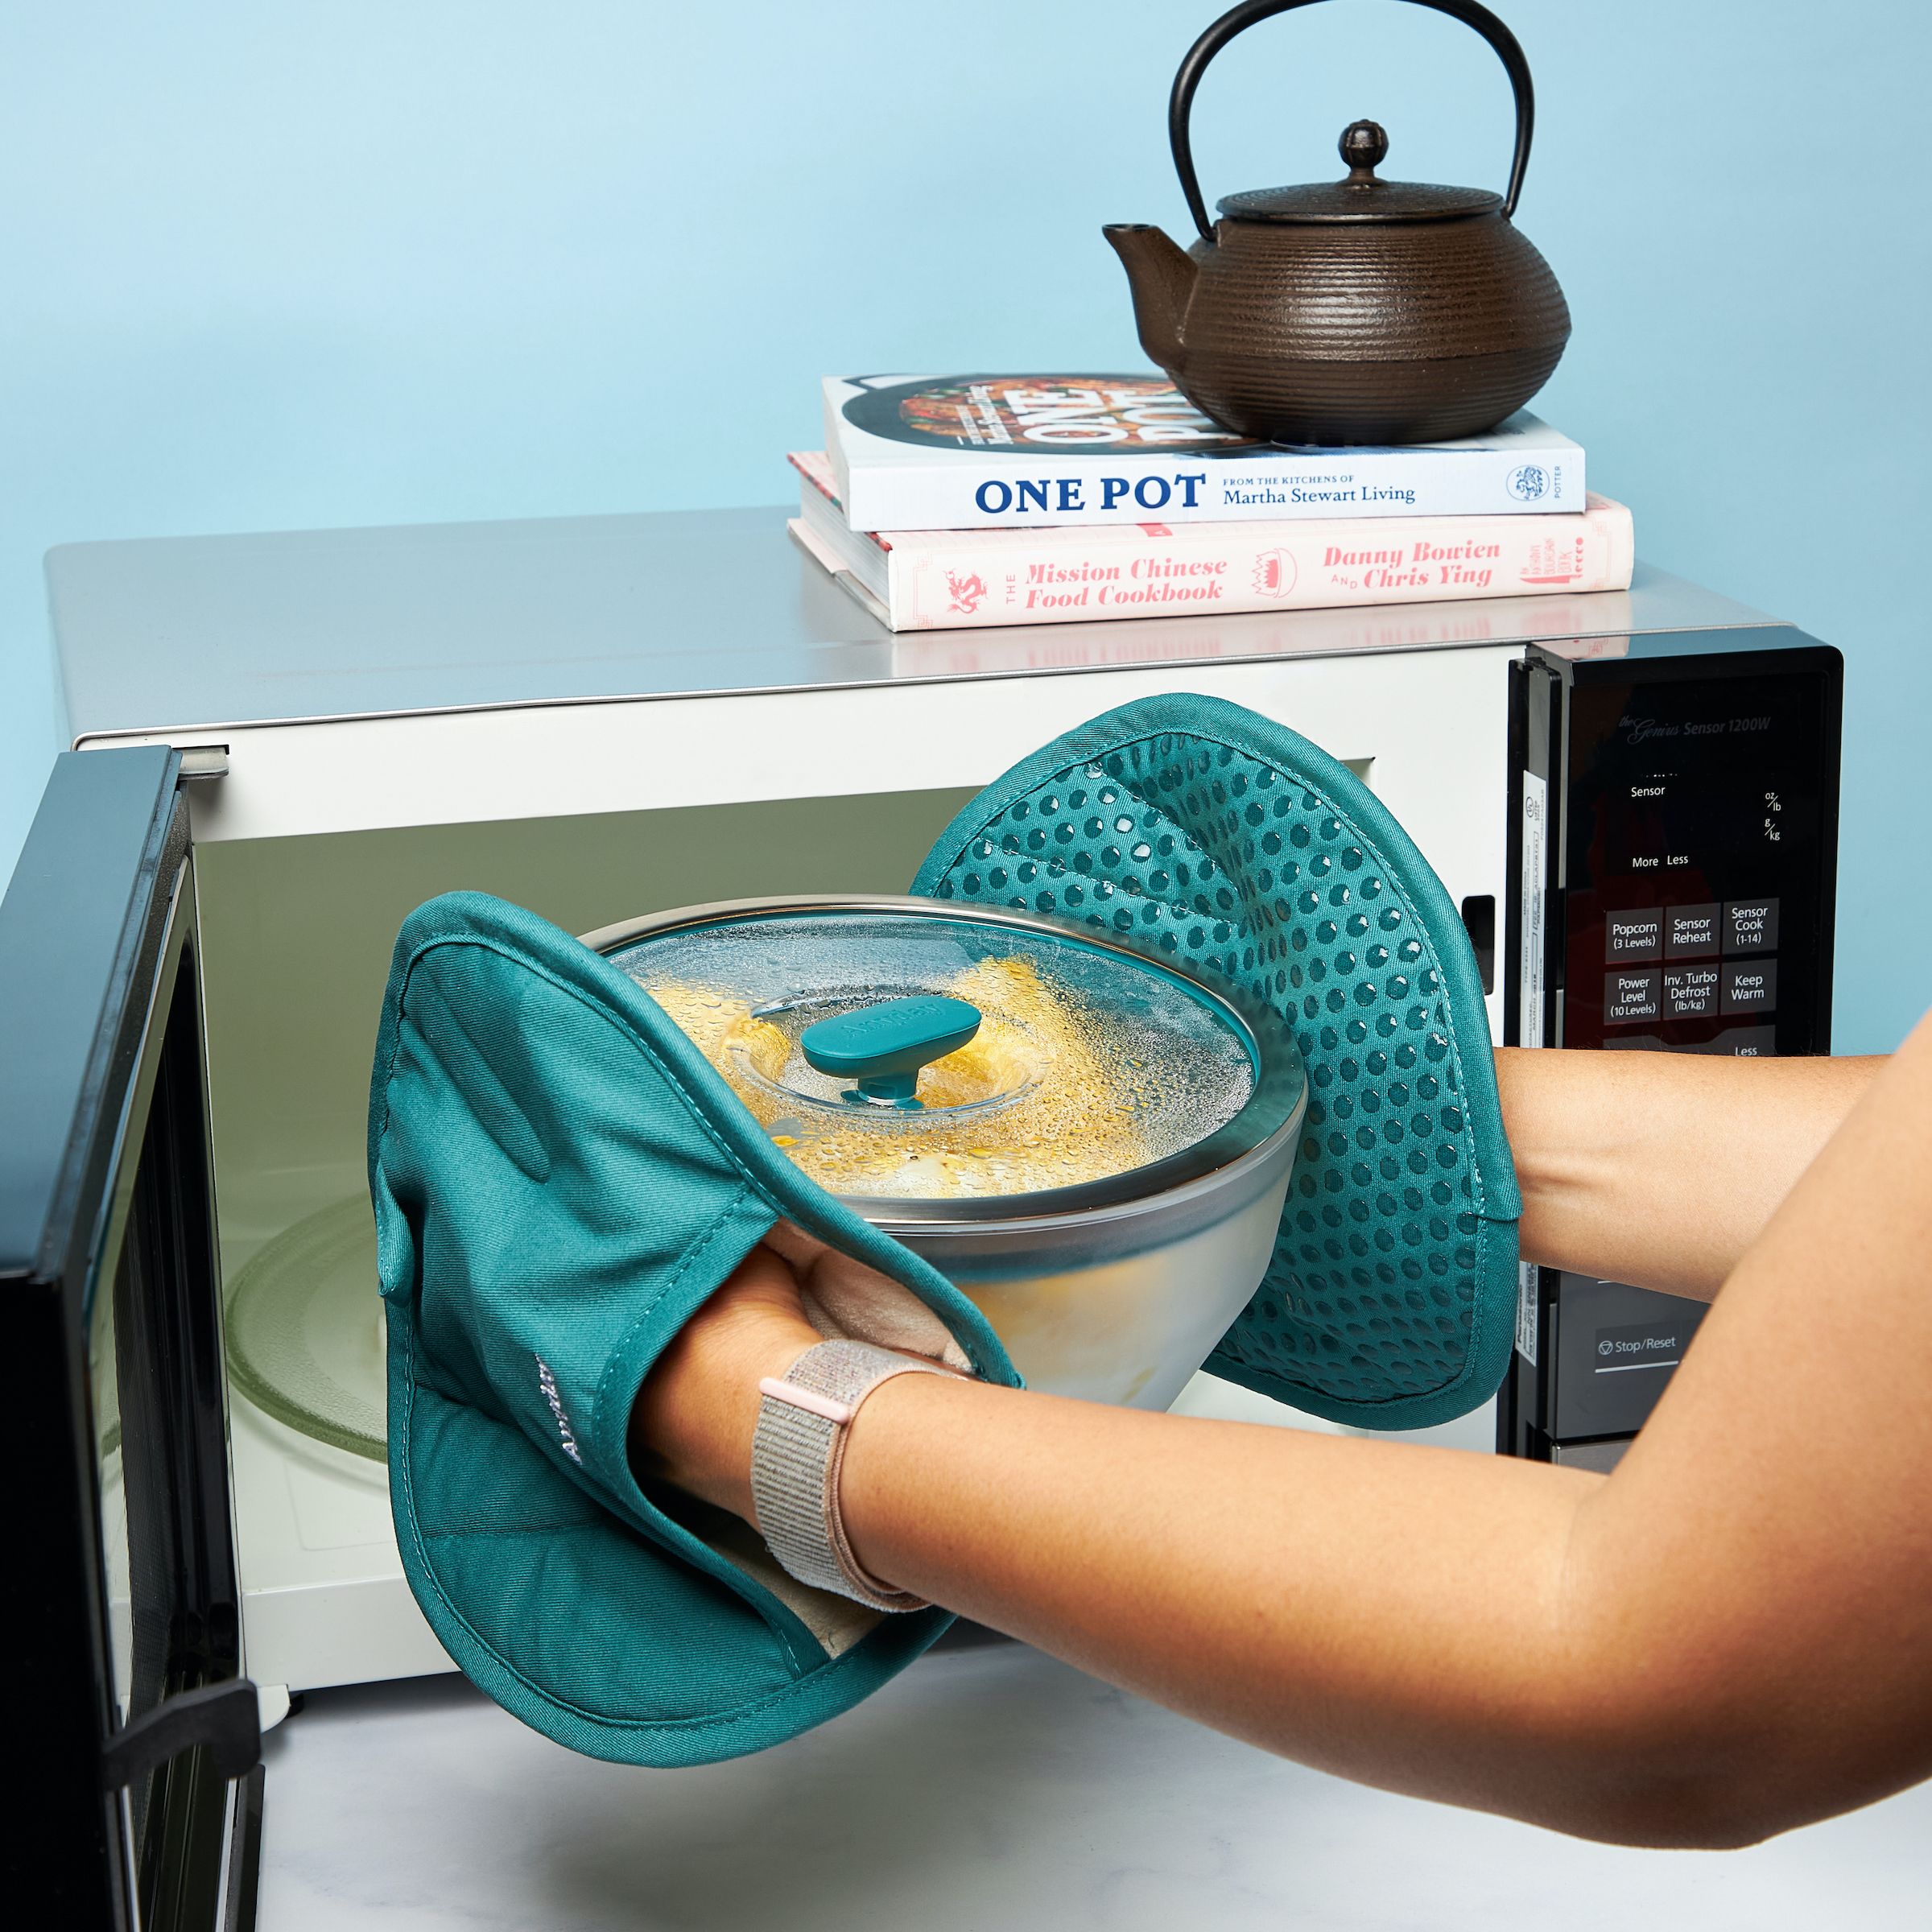 Anyday Cookware Introduces Microwave Cooking